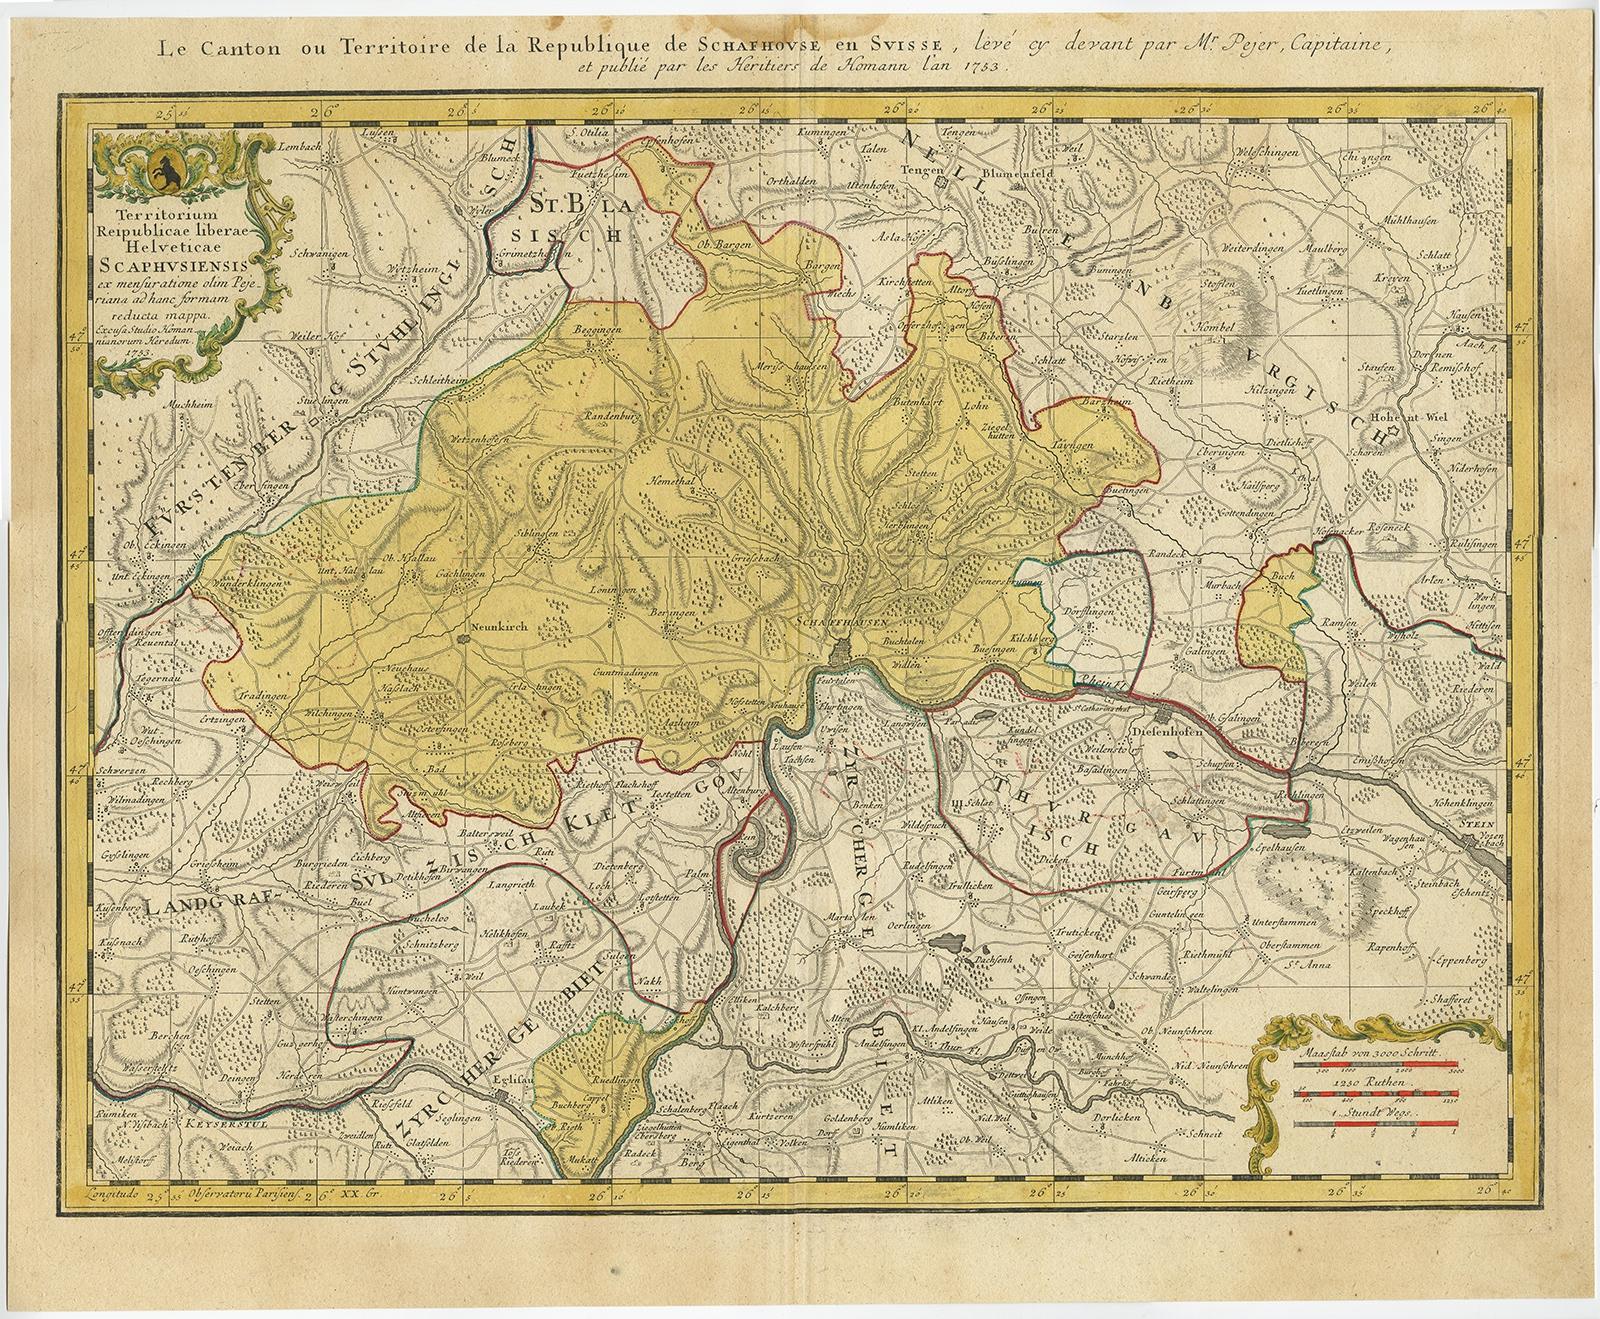 Antique map Switzerland titled 'Territorium Reipublicae liberae Helveticae Scaphusiensis (..)'. Regional map of Switzerland. 

Artists and Engravers: Homann Heirs was a German publishing firm that enjoyed a major place in the European map market